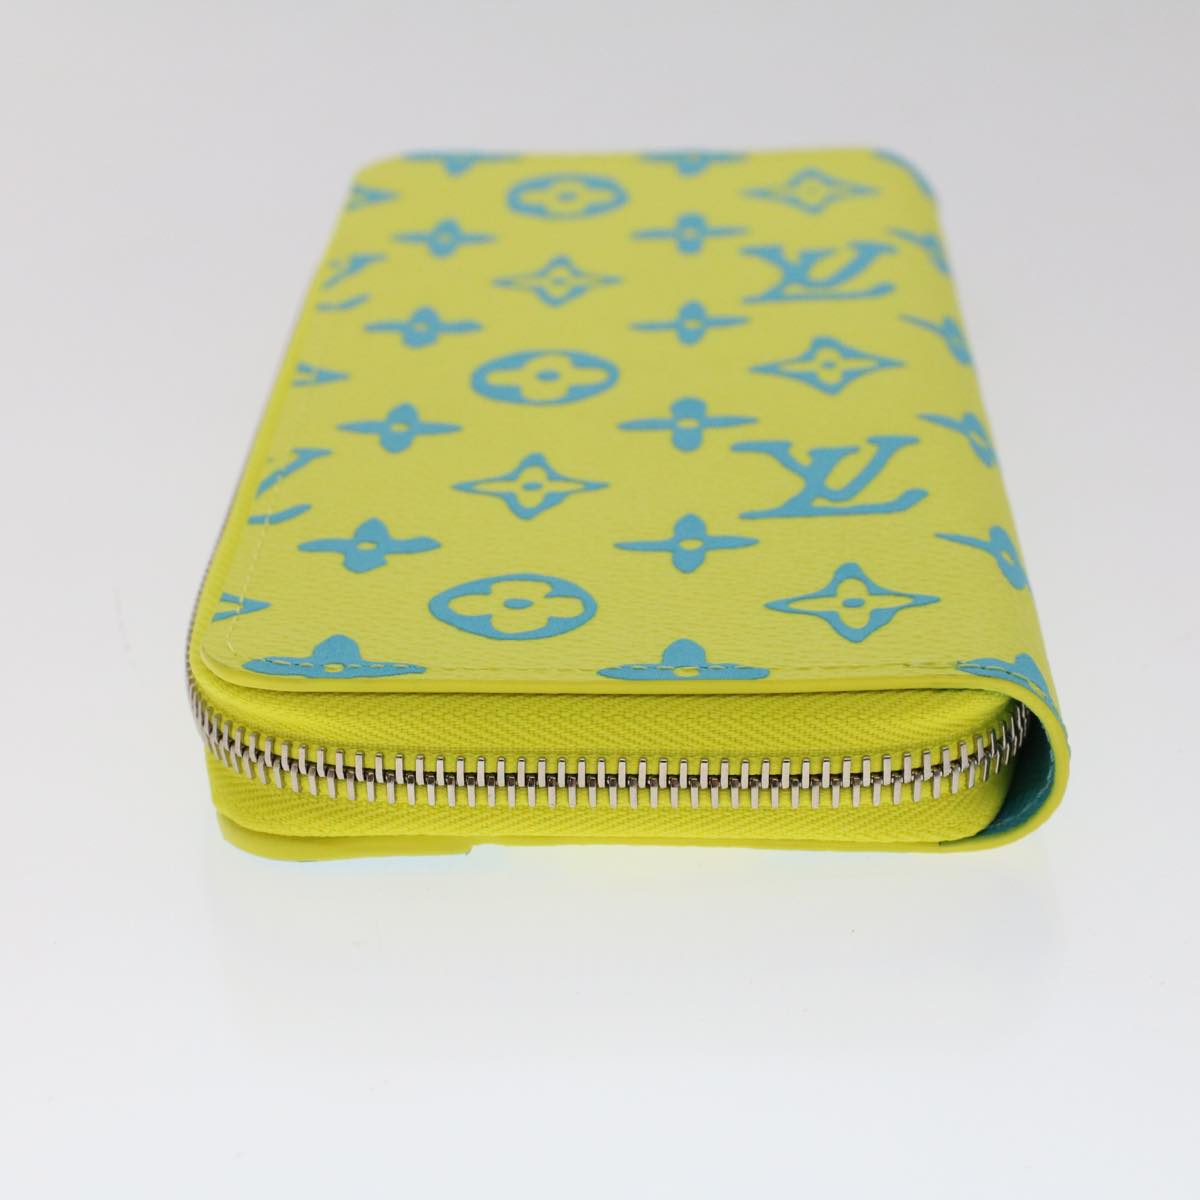 LOUIS VUITTON Playground Zippy Wallet Vertical Wallet Yellow M82005 Auth 48507A